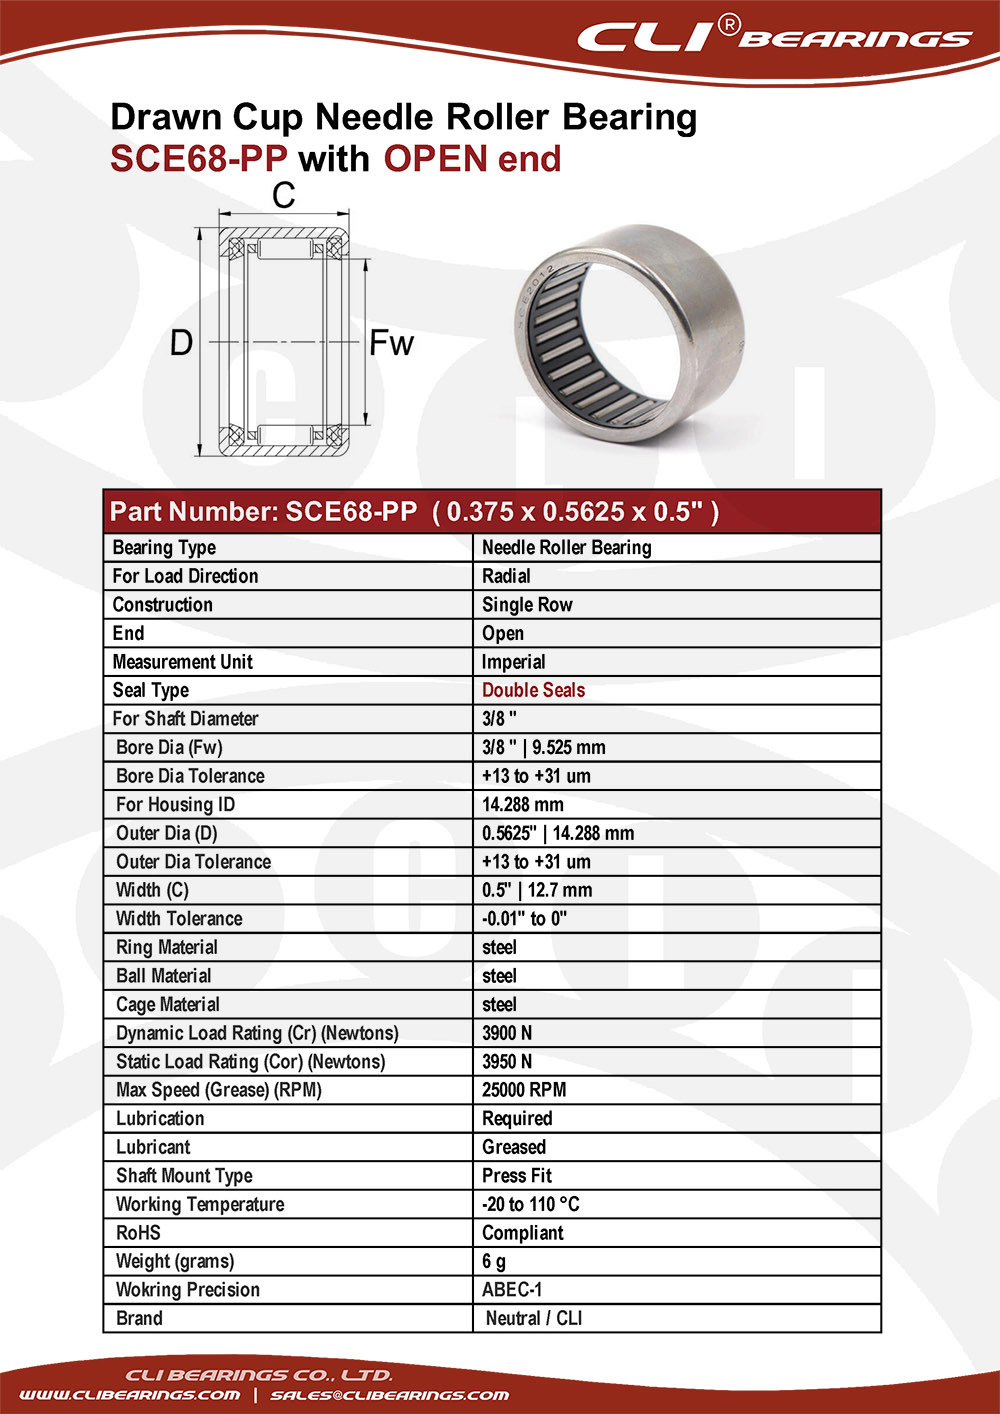 Original sce68 pp 0 375x0 5625x0 5 drawn cup needle roller bearings with double seals   cli bearings co ltd nw